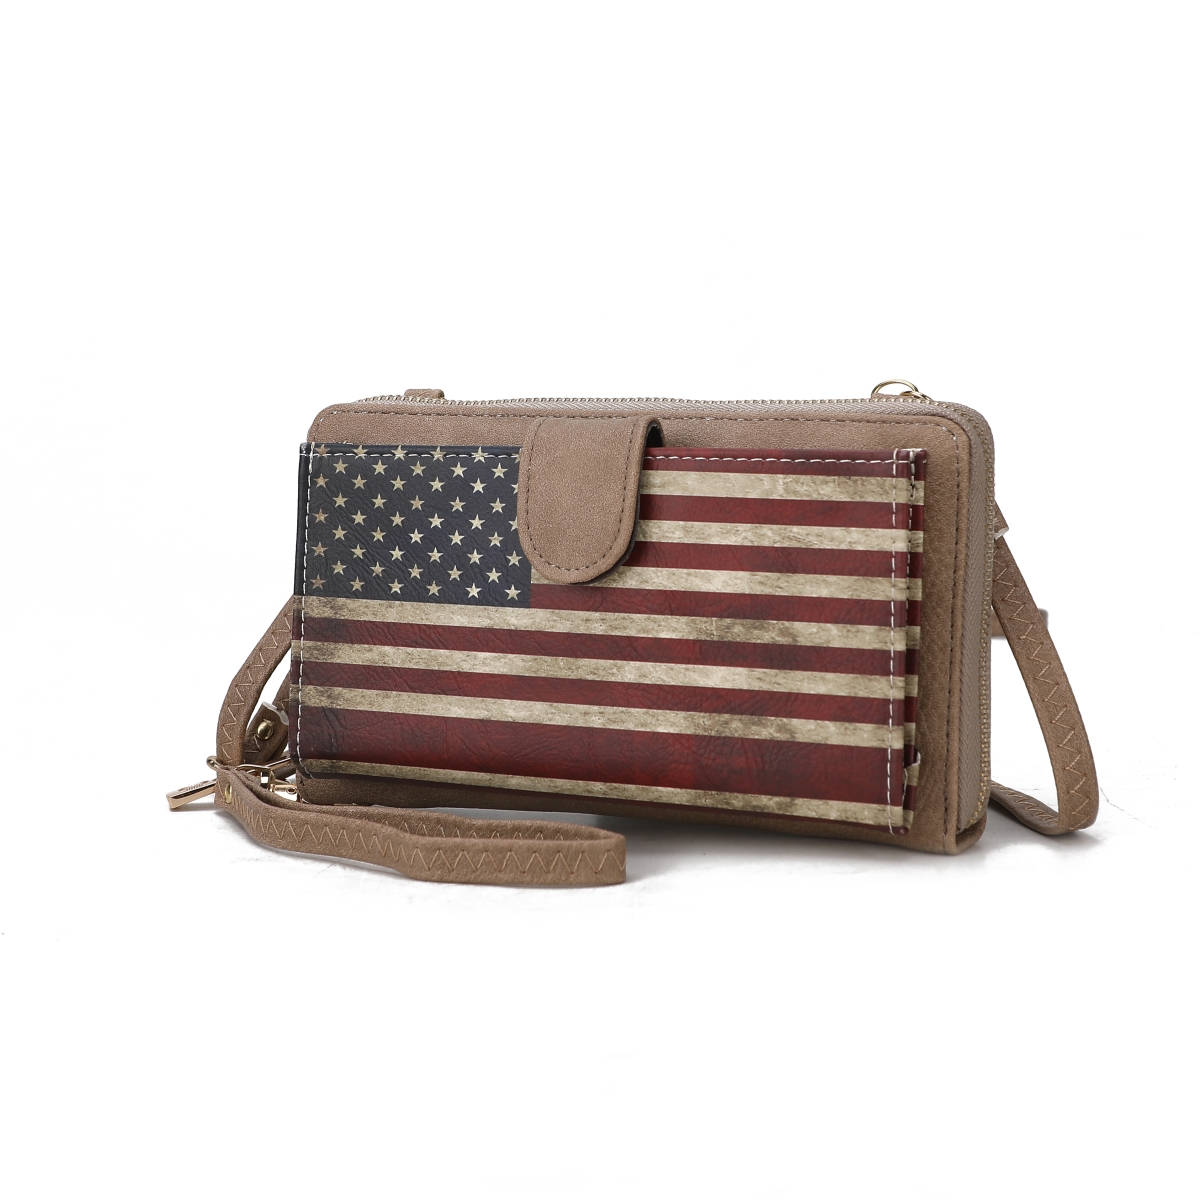 Picture of MKF Collection by Mia K. MKF-FG7406TP Kiara Smartphone and Wallet Convertible FLAG Crossbody Bag